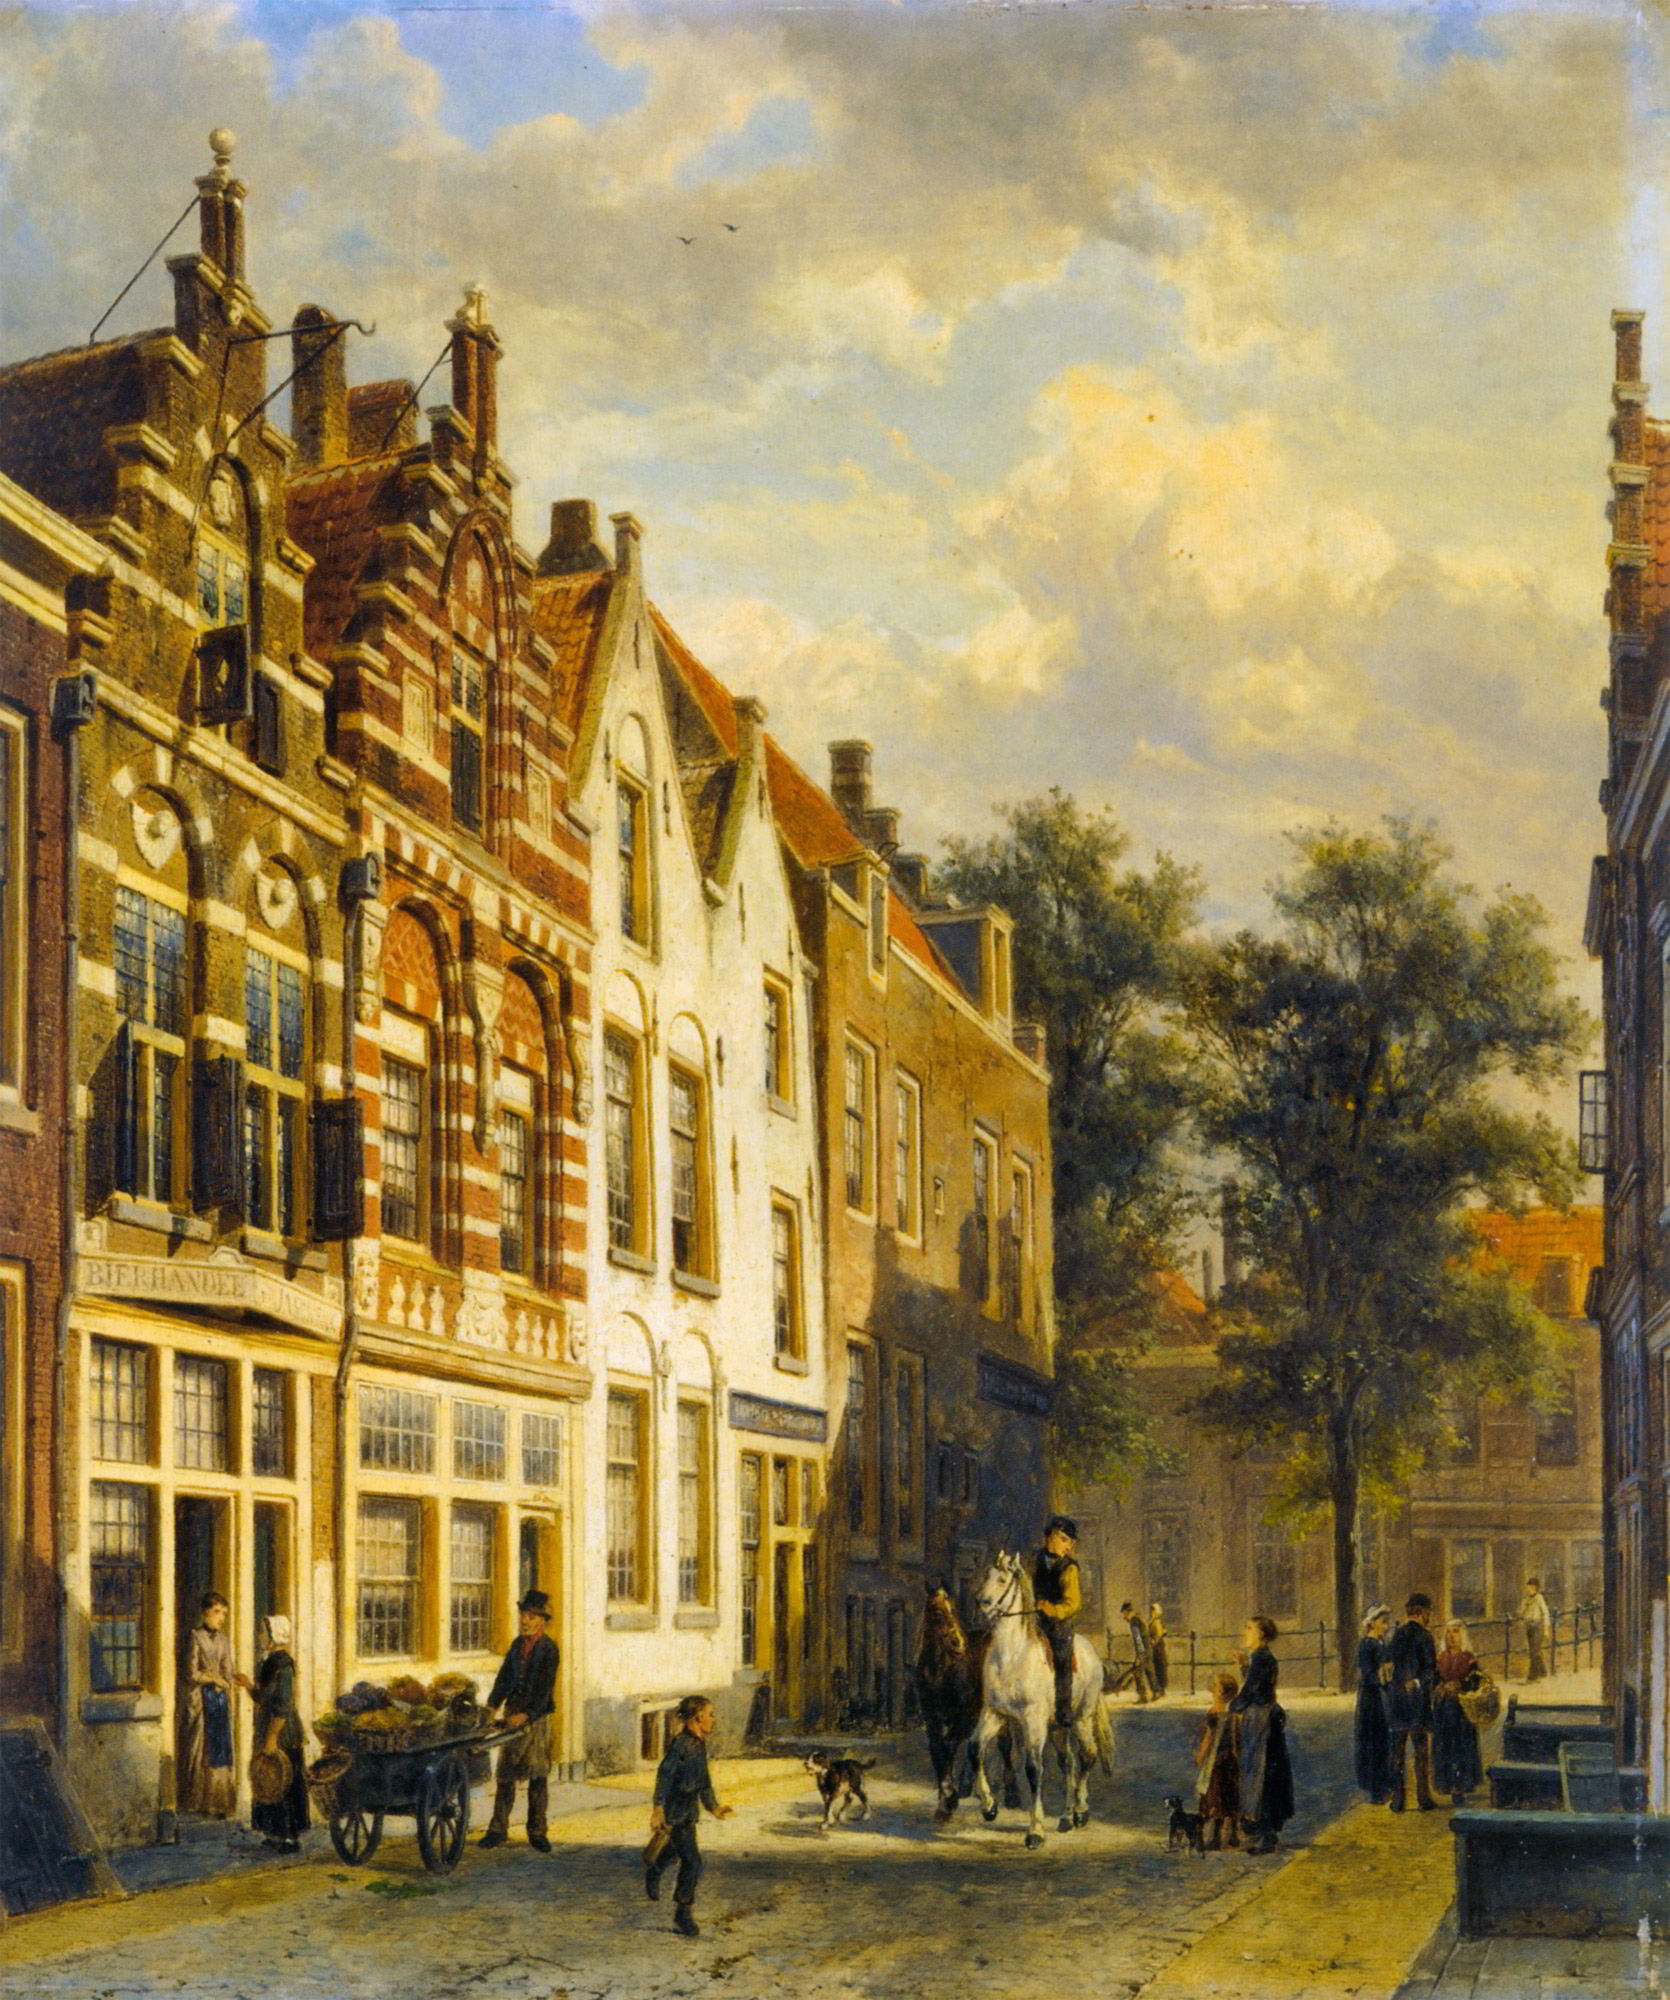 Figures in the Sunlit Streets of a Dutch Town by Cornelis Springer-Dutch Painting